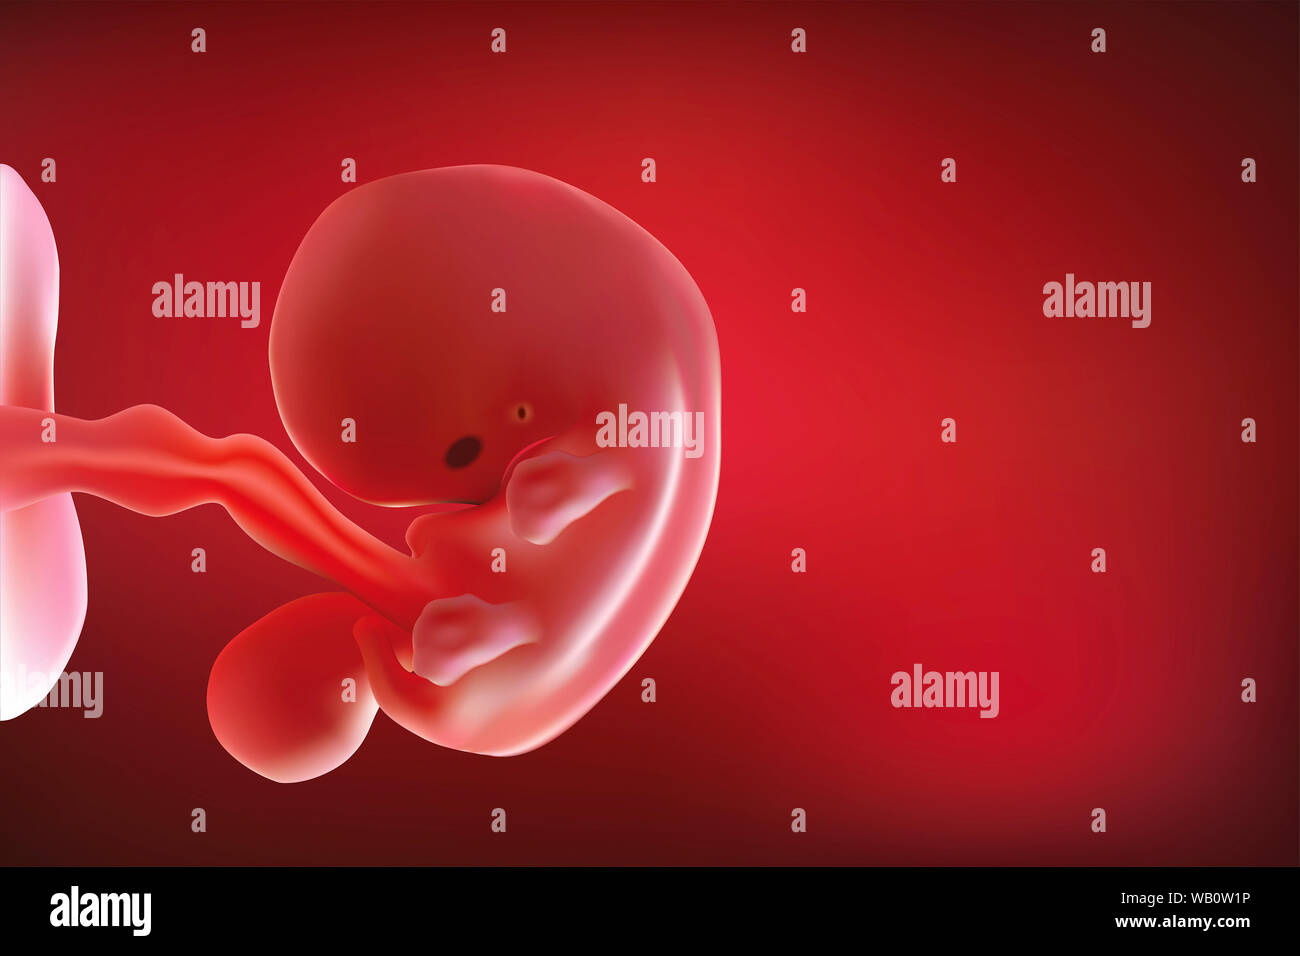 Fetus & Baby in mother's womb Fetus &As illustrated with red tones Stock Photo